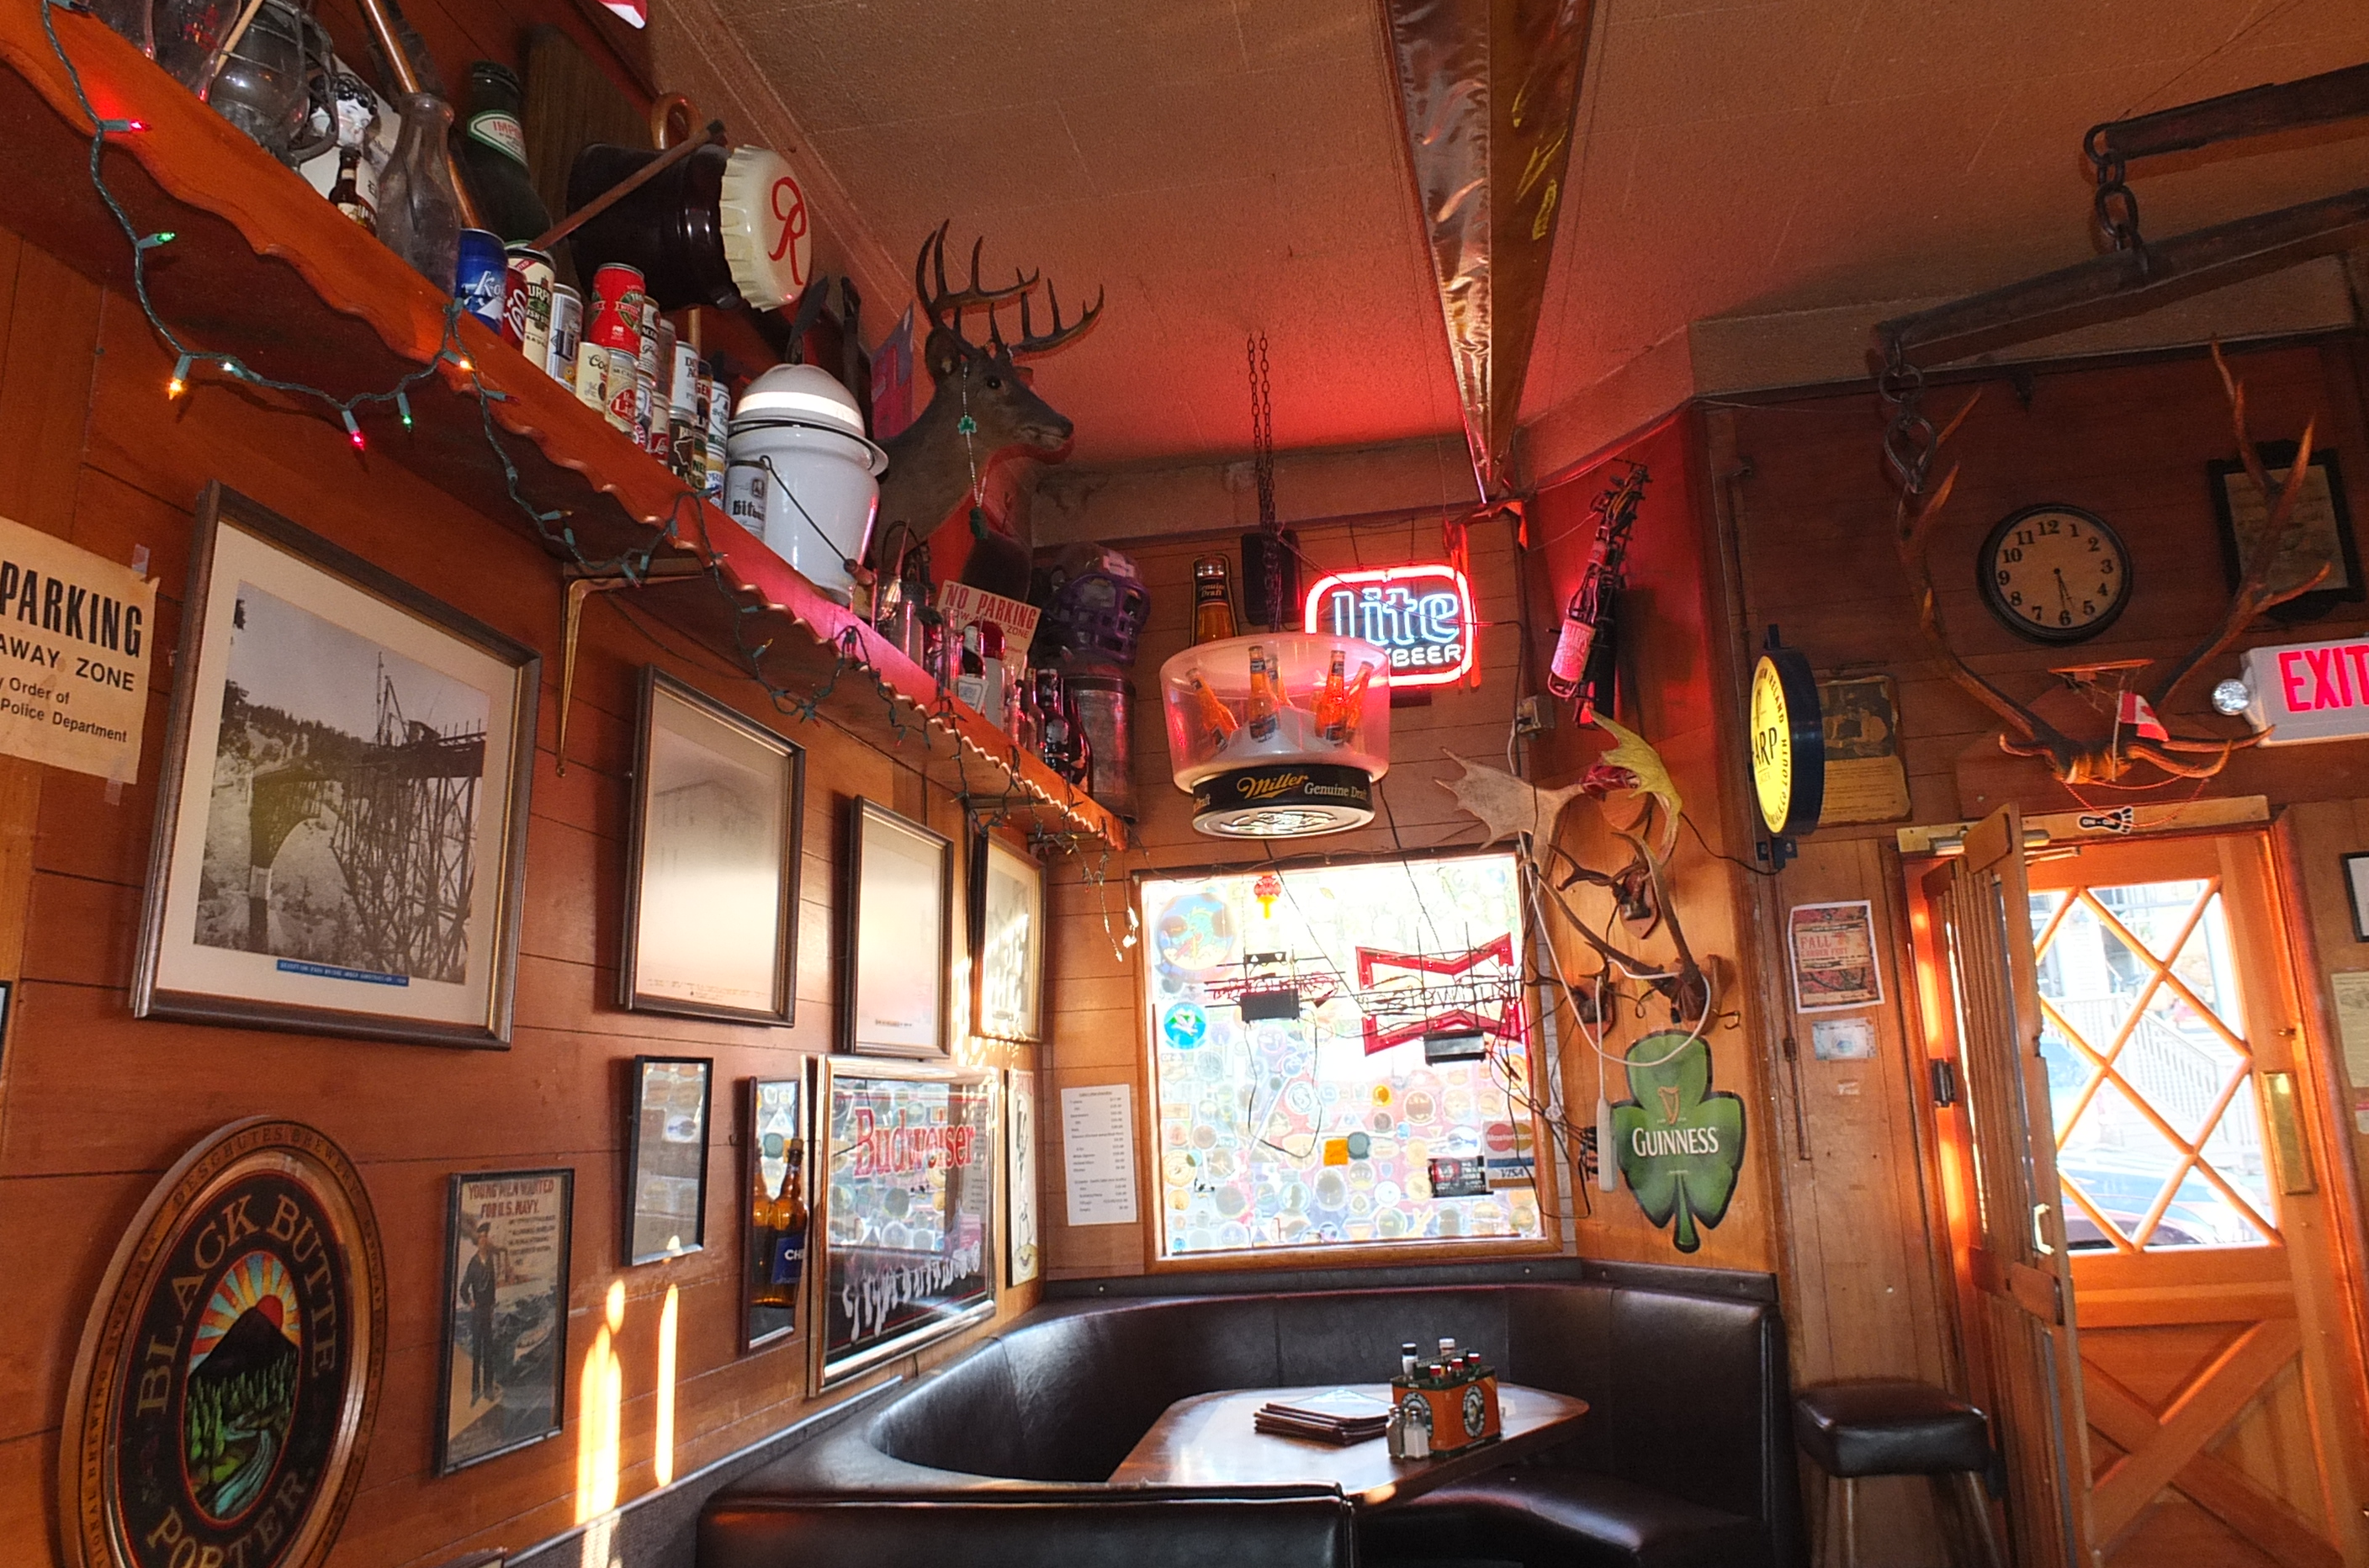 Toby's Tavern - Whidbey and Camano Islands